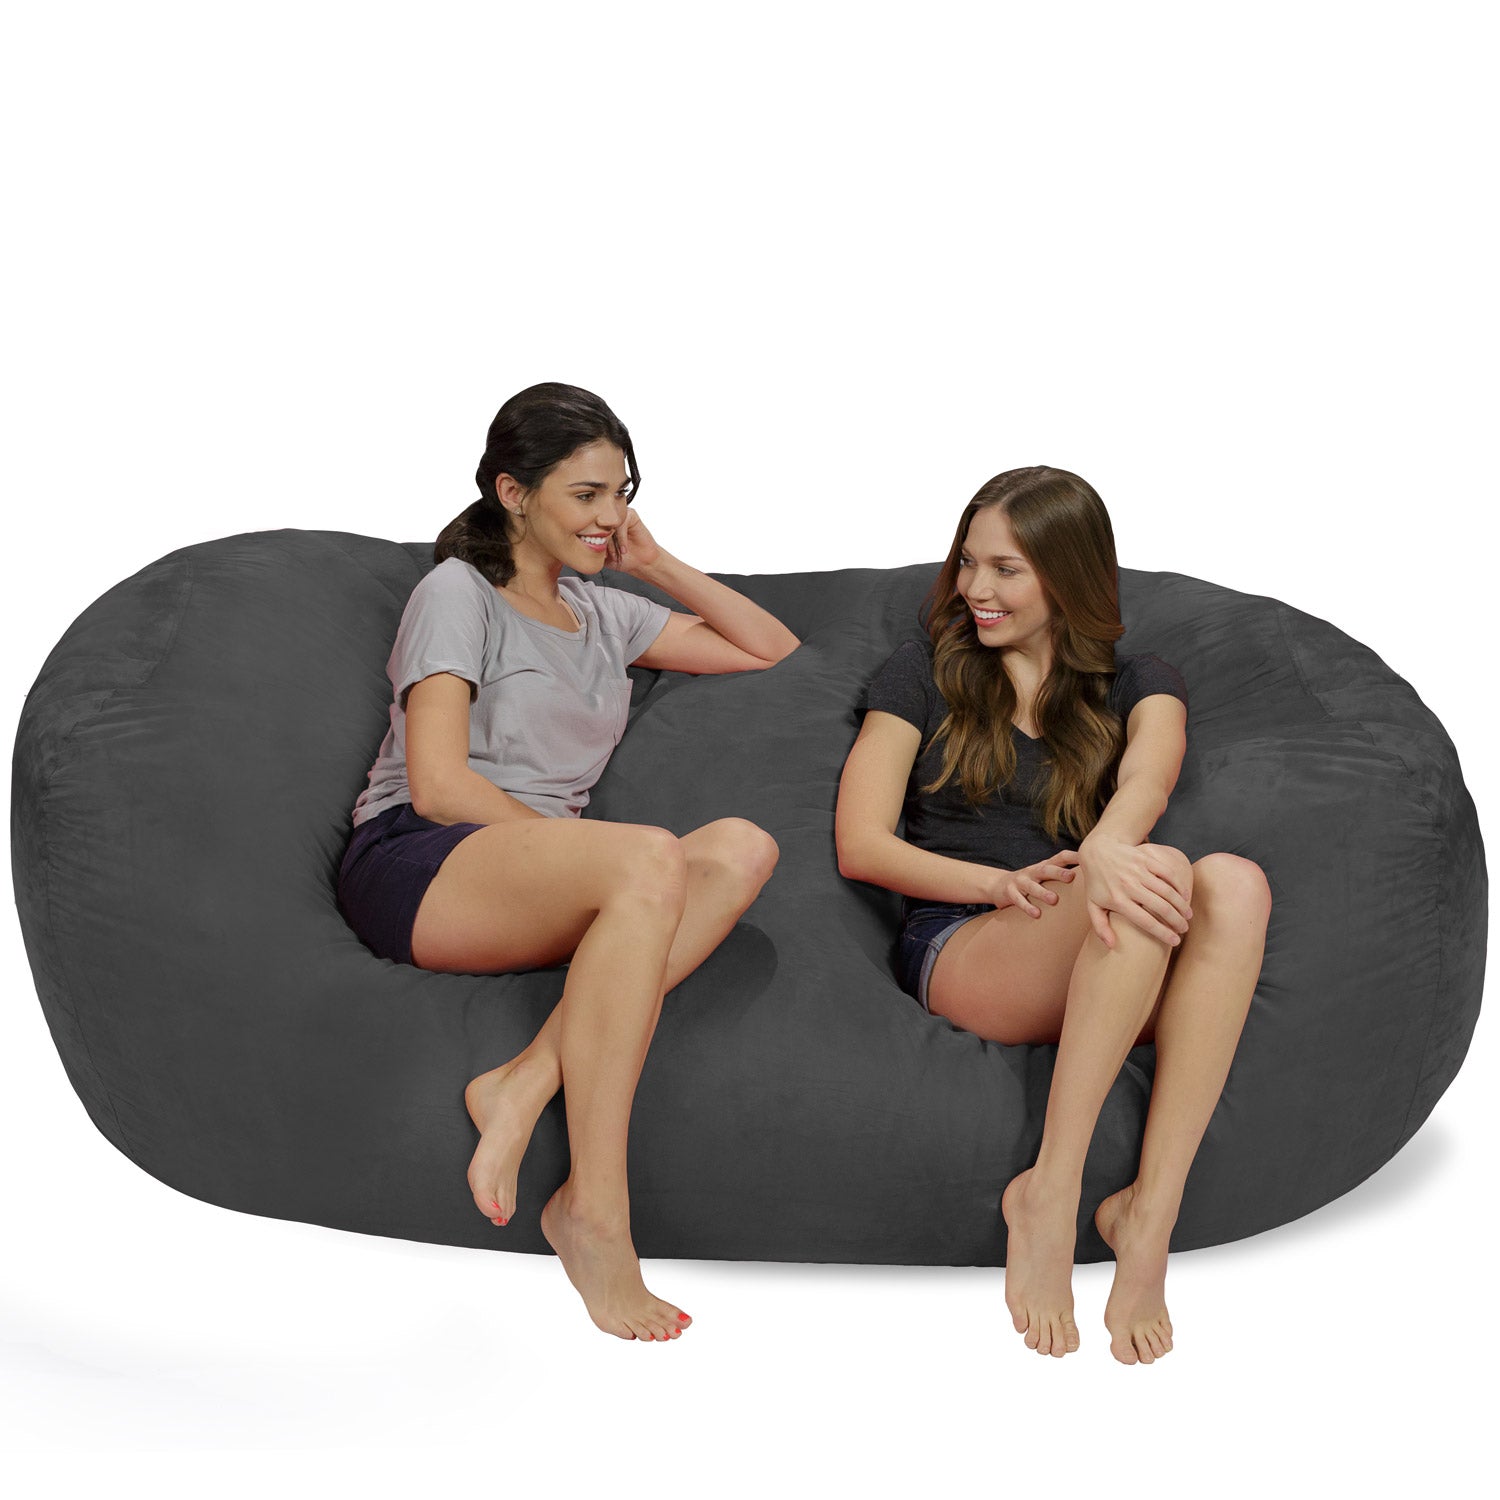 Relax Sacks 7.5' Giant Bean Bag Couch - Charcoal Gray <!-- Commented out by  CMS to remove site name from title --> <!-- End of Edit by CMS -->